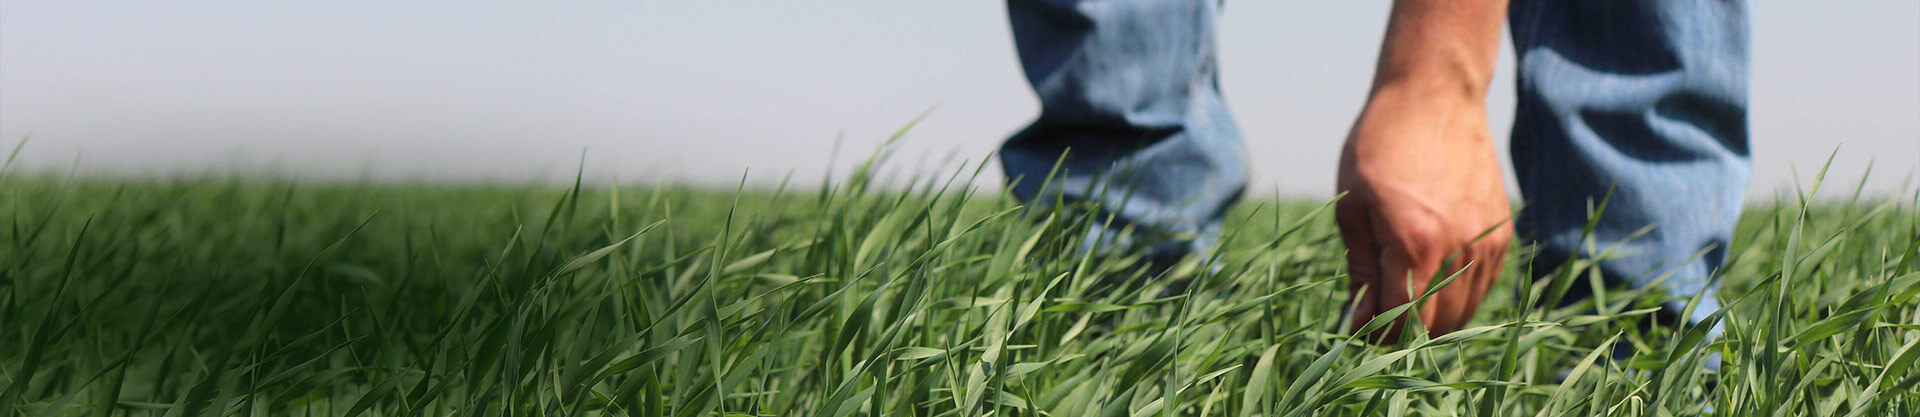 Identifying weed competitive varieties in wheat and barley